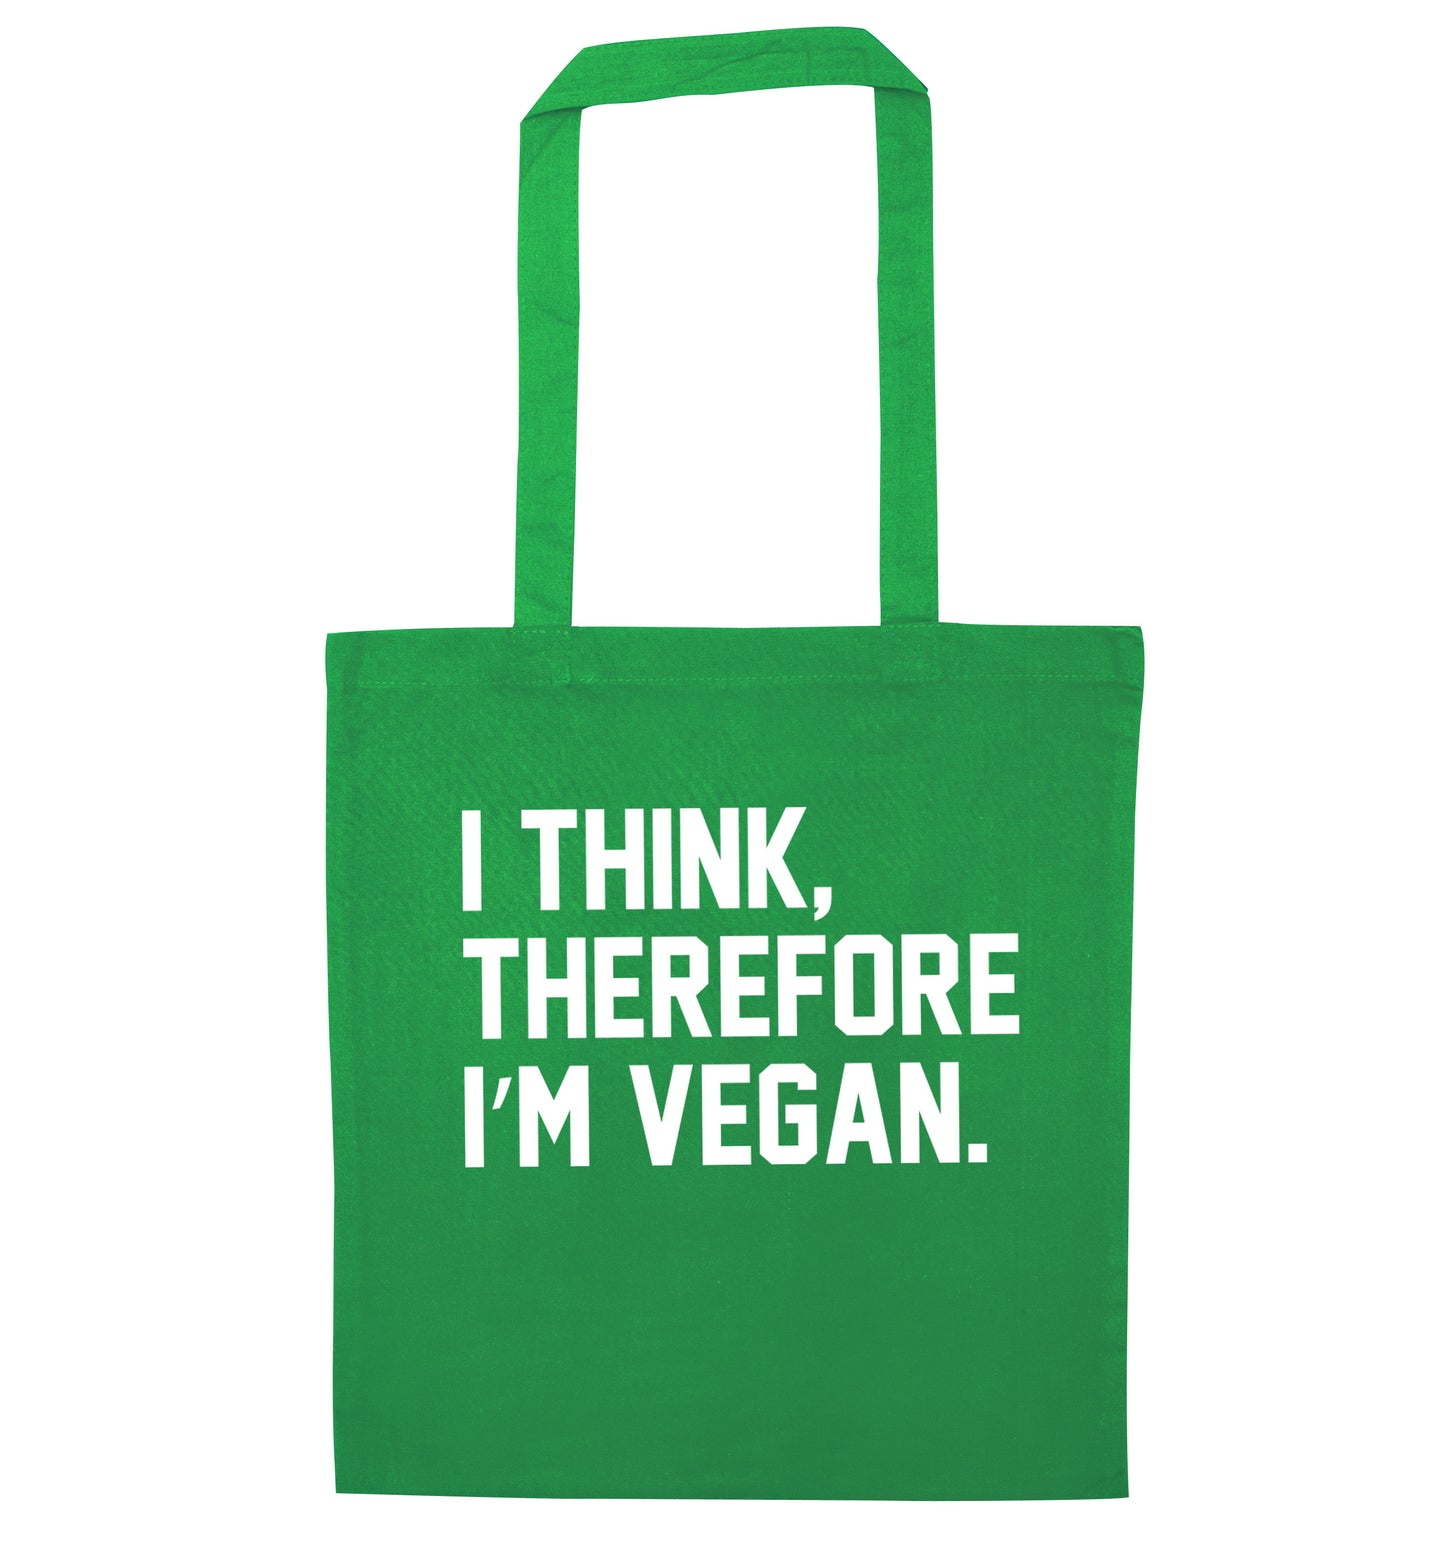 I think therefore I'm vegan green tote bag